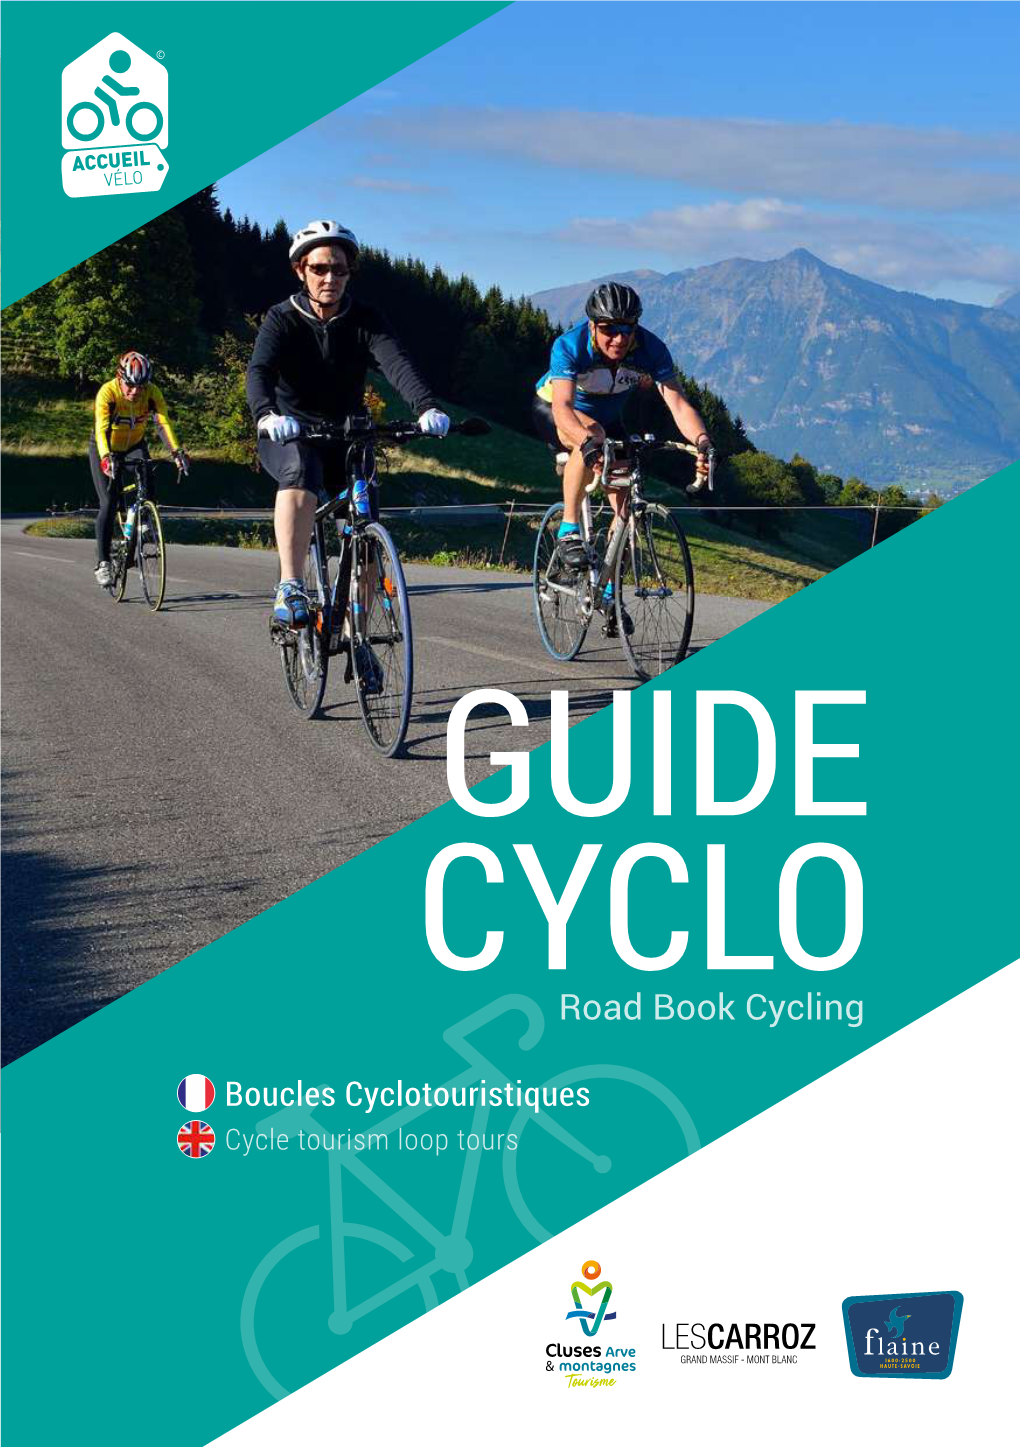 Road Book Cycling